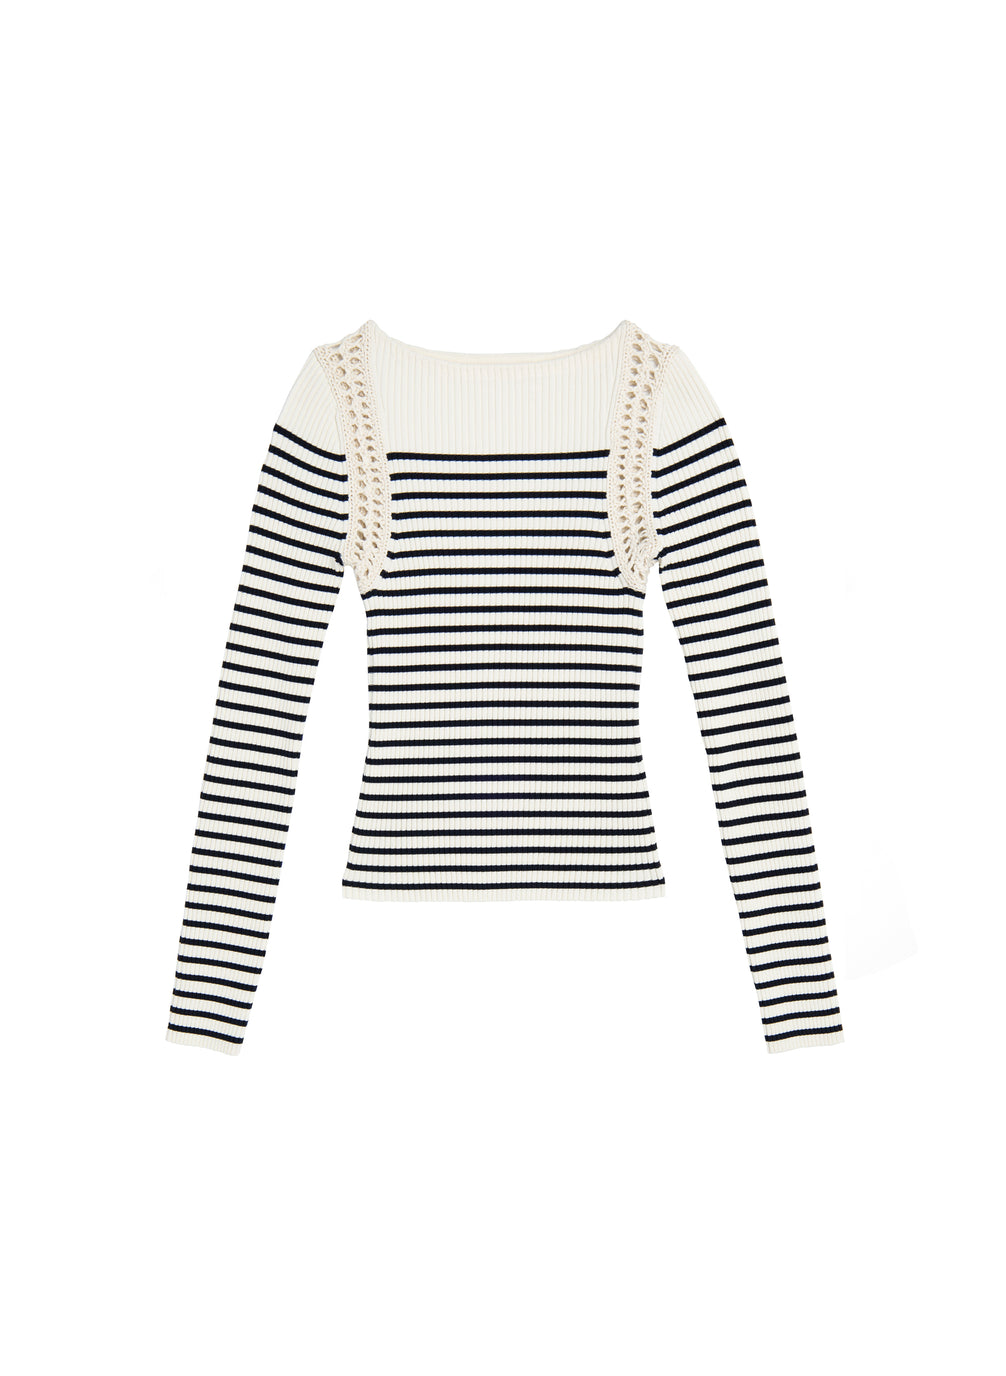 flatlay of white and navy striped top with bell sleeves